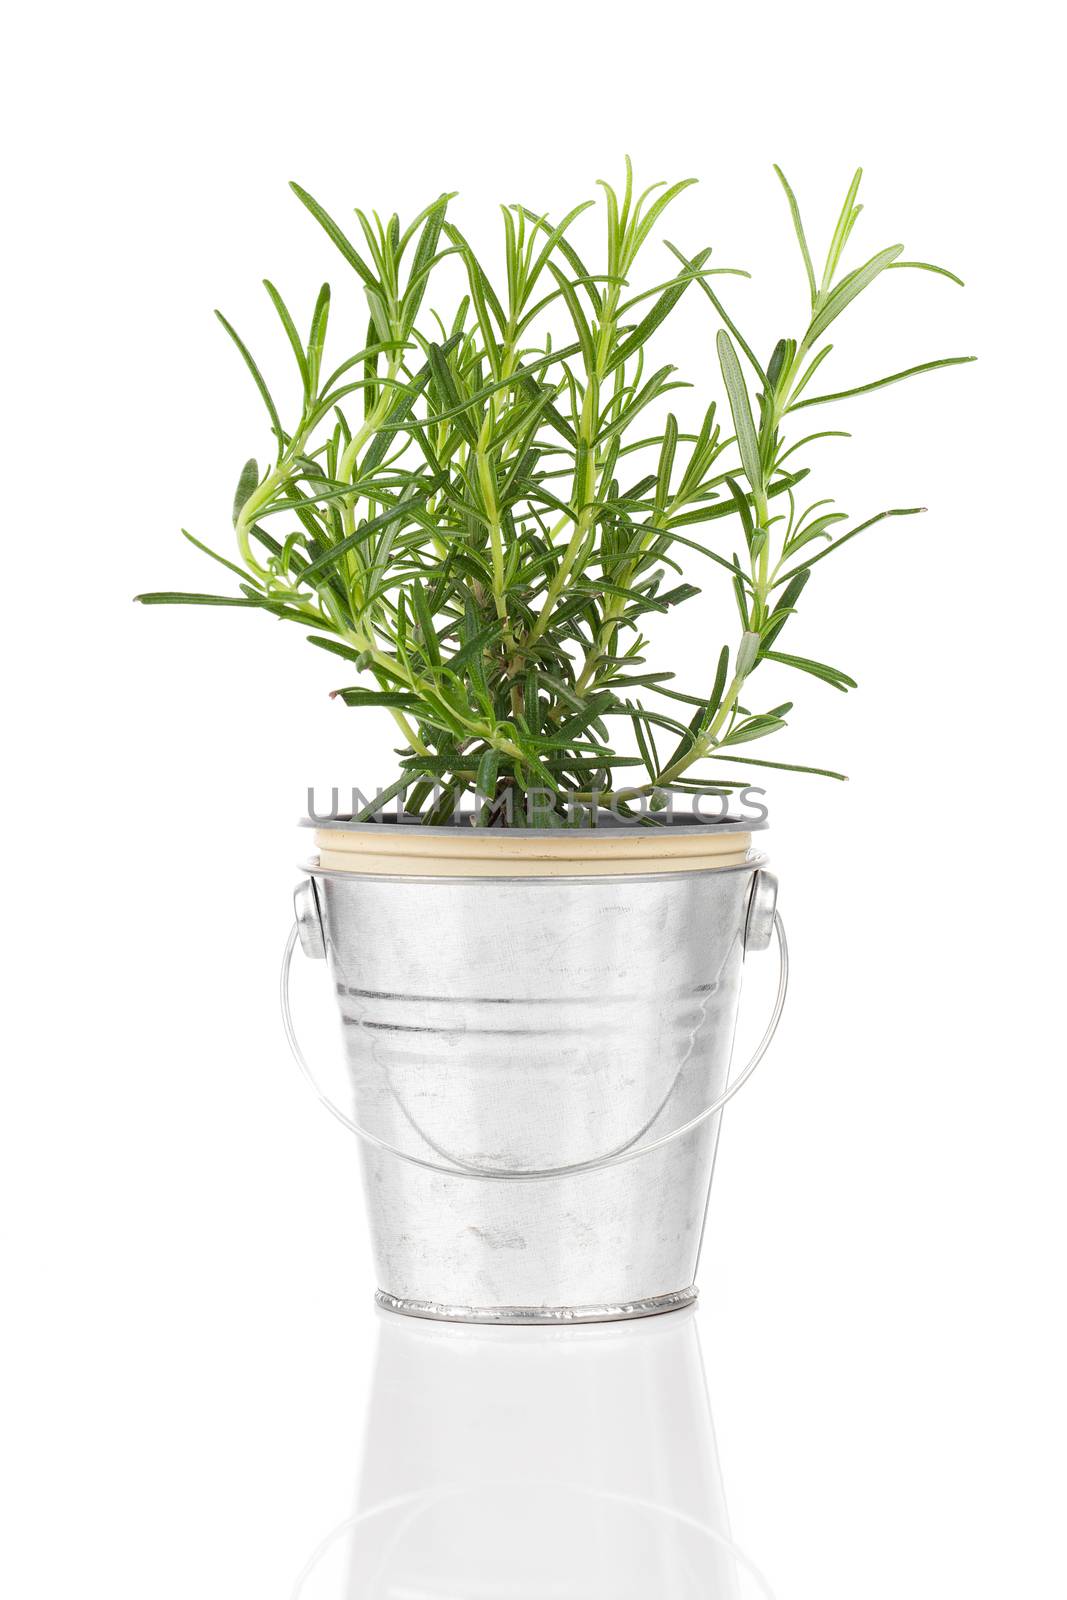 rosemary herb plant growing in a distressed pewter pot, isolated over white background.